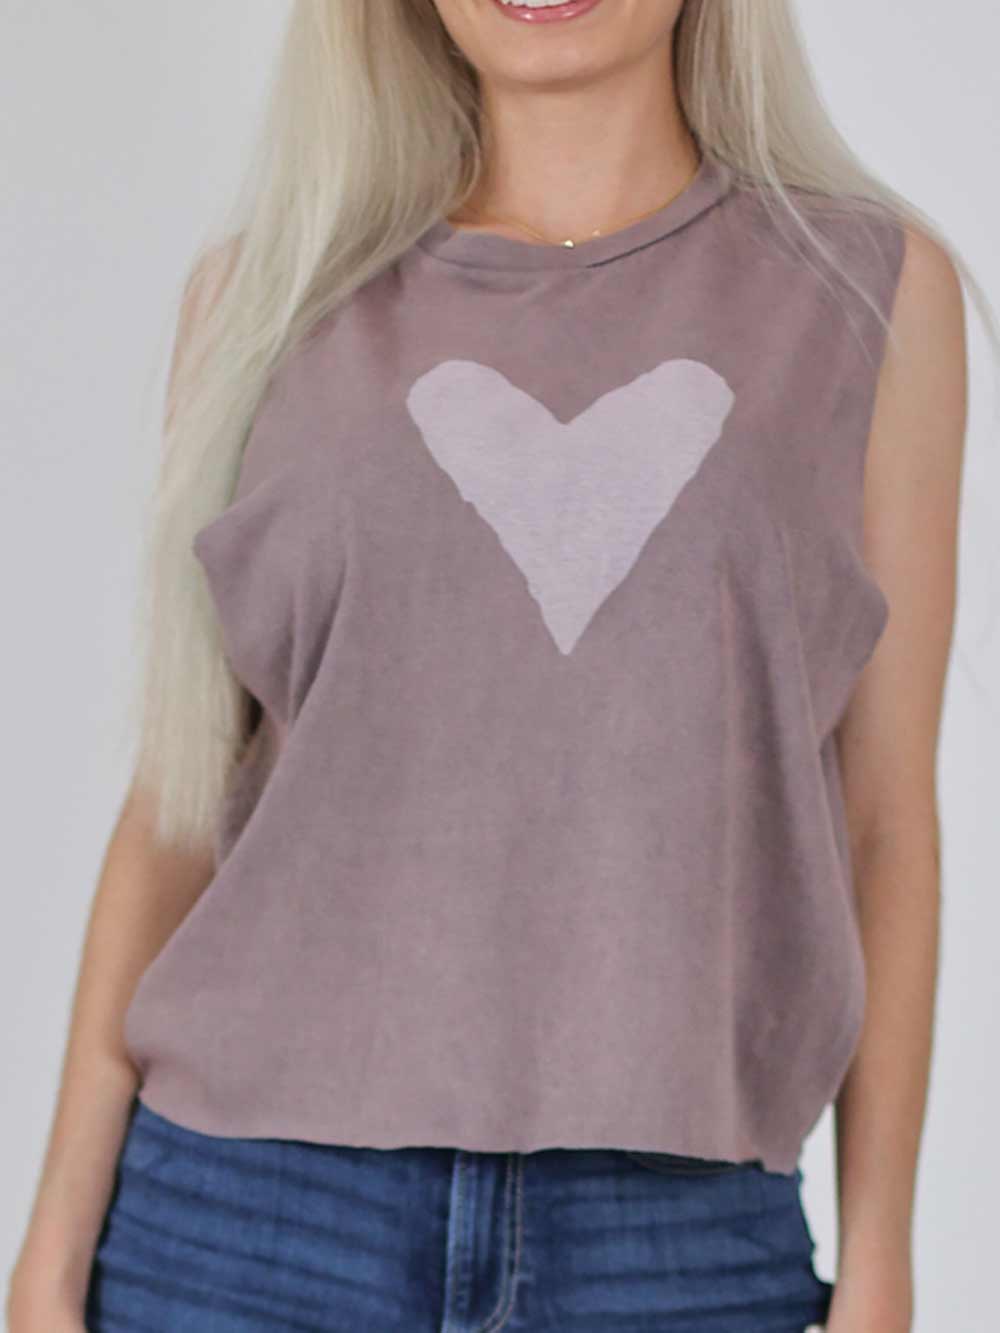 Zinc color crop top with white heart print